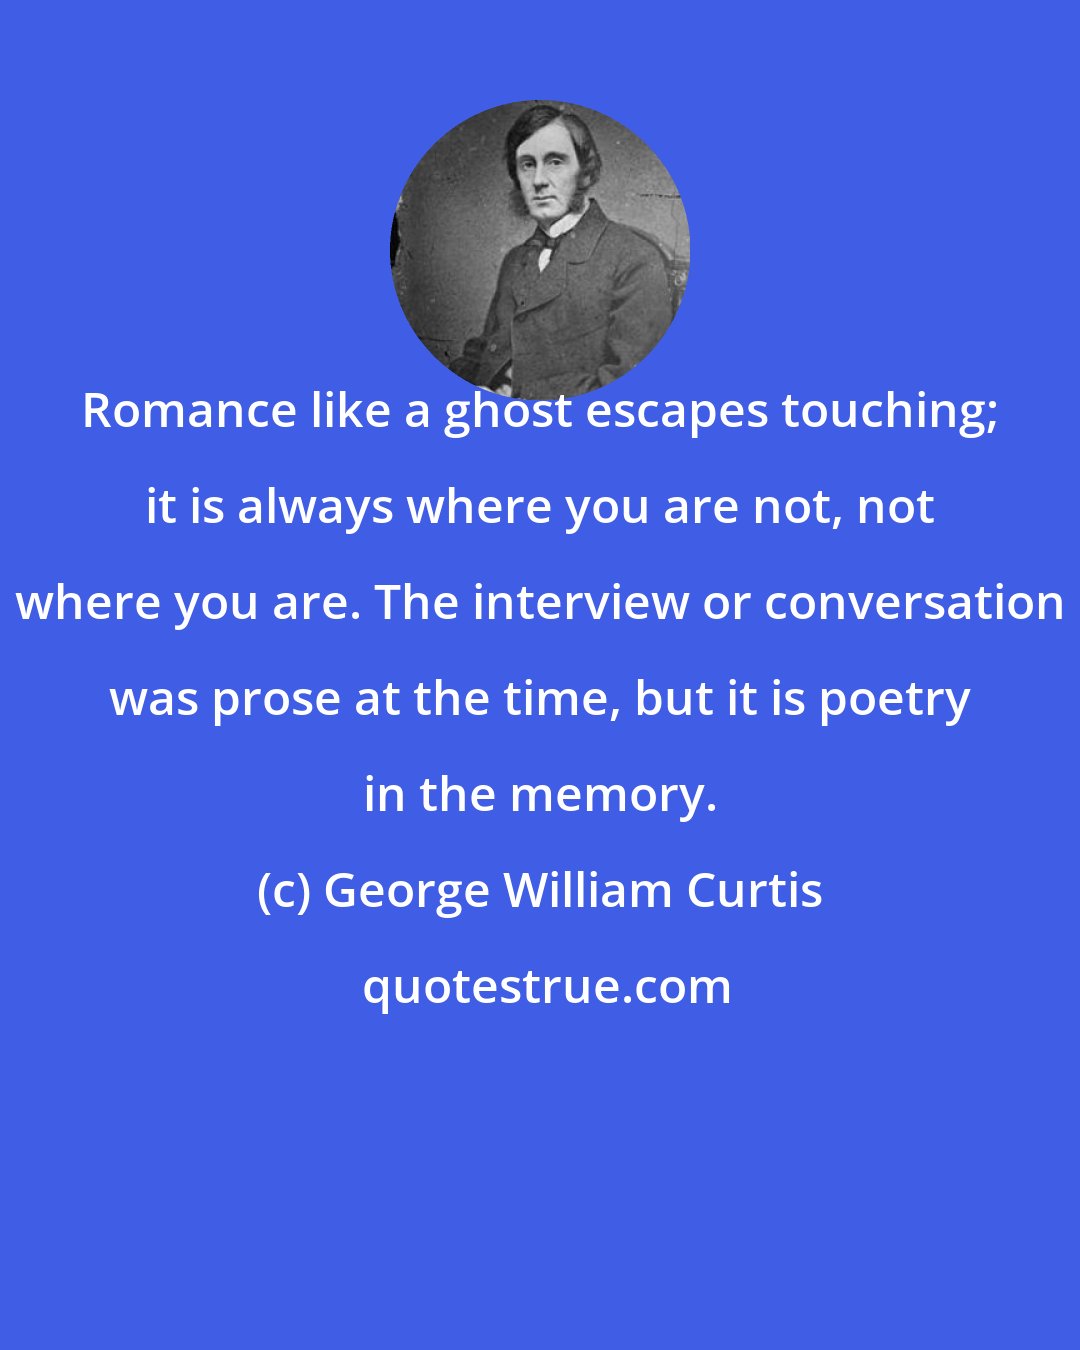 George William Curtis: Romance like a ghost escapes touching; it is always where you are not, not where you are. The interview or conversation was prose at the time, but it is poetry in the memory.